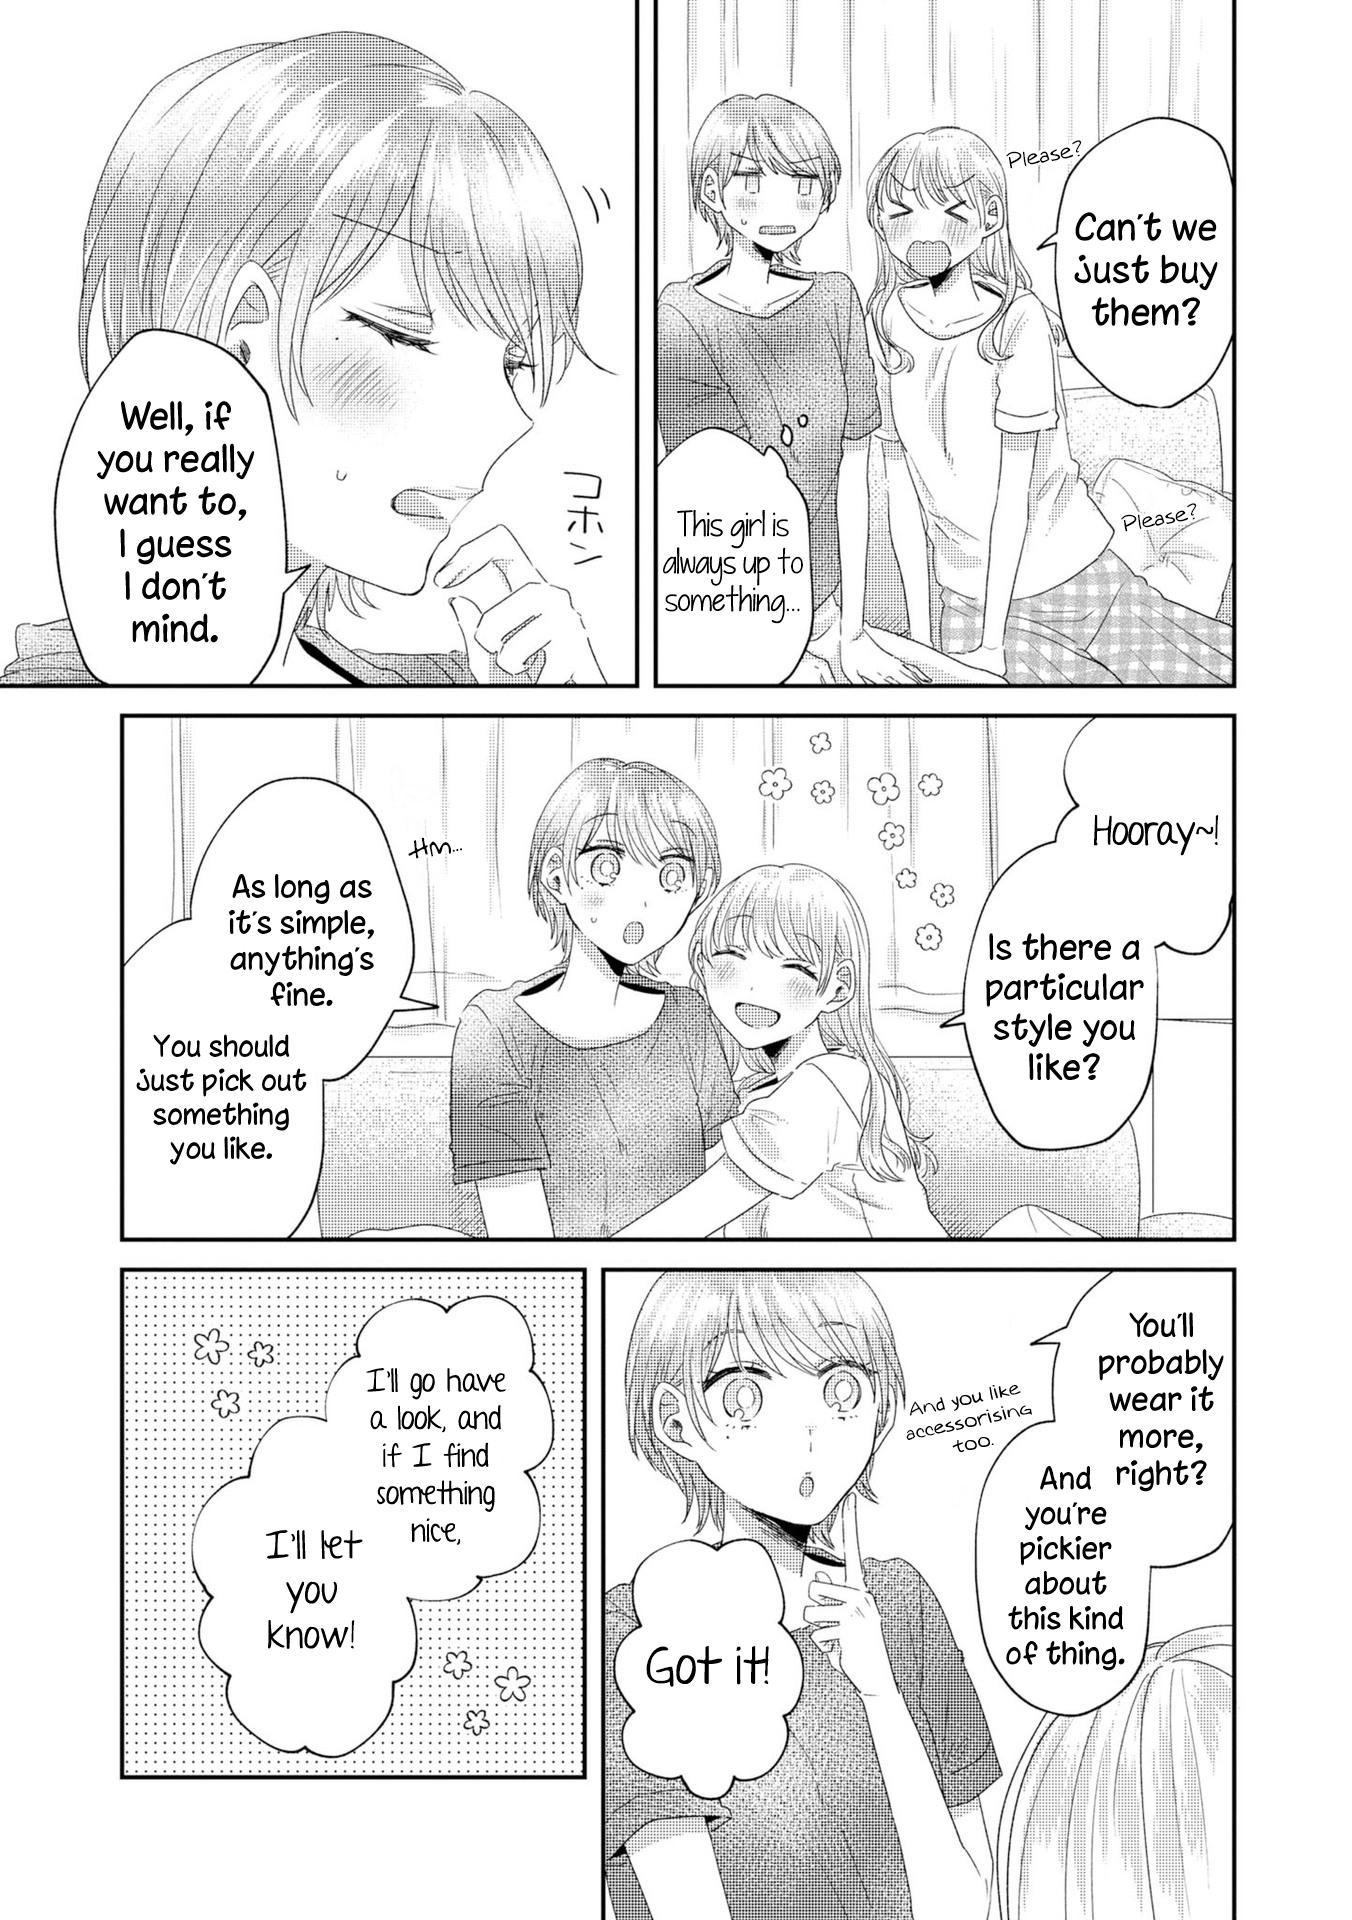 Today, We Continue Our Lives Together Under The Same Roof - Page 4